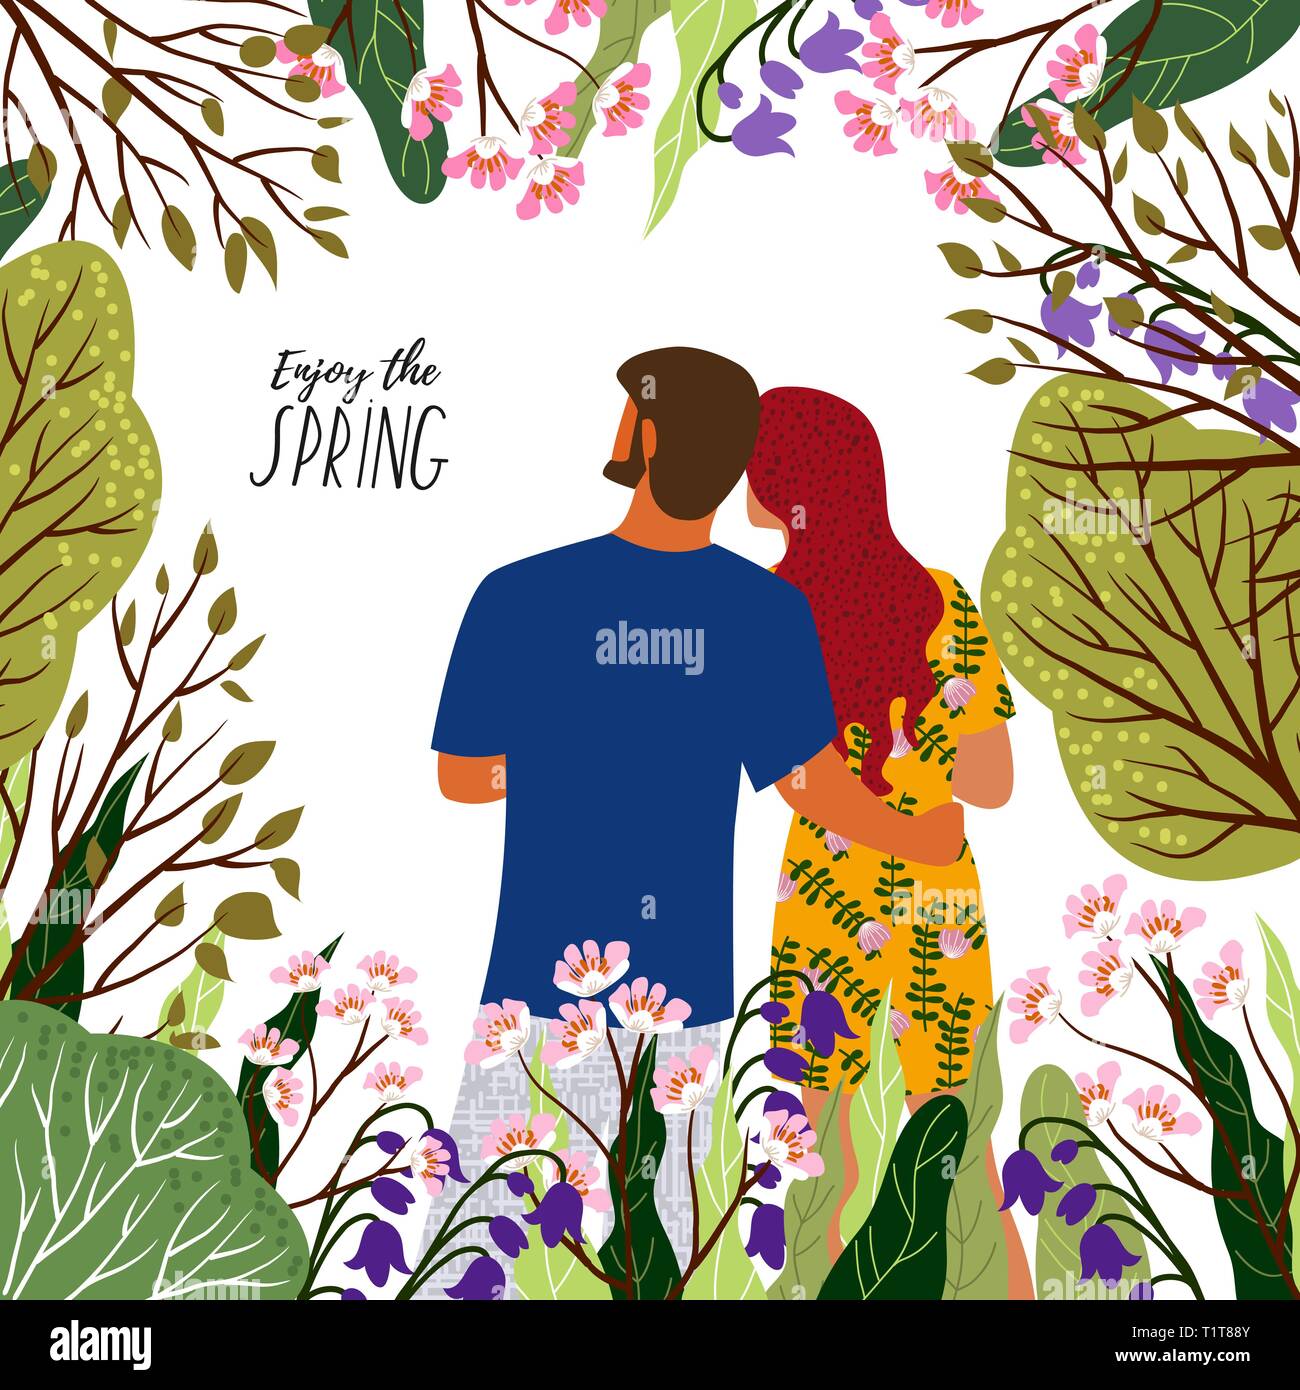 Enjoy the spring. Young couple, flowers, trees in a trendy flat cute style on a white background. Vector illustration Stock Vector